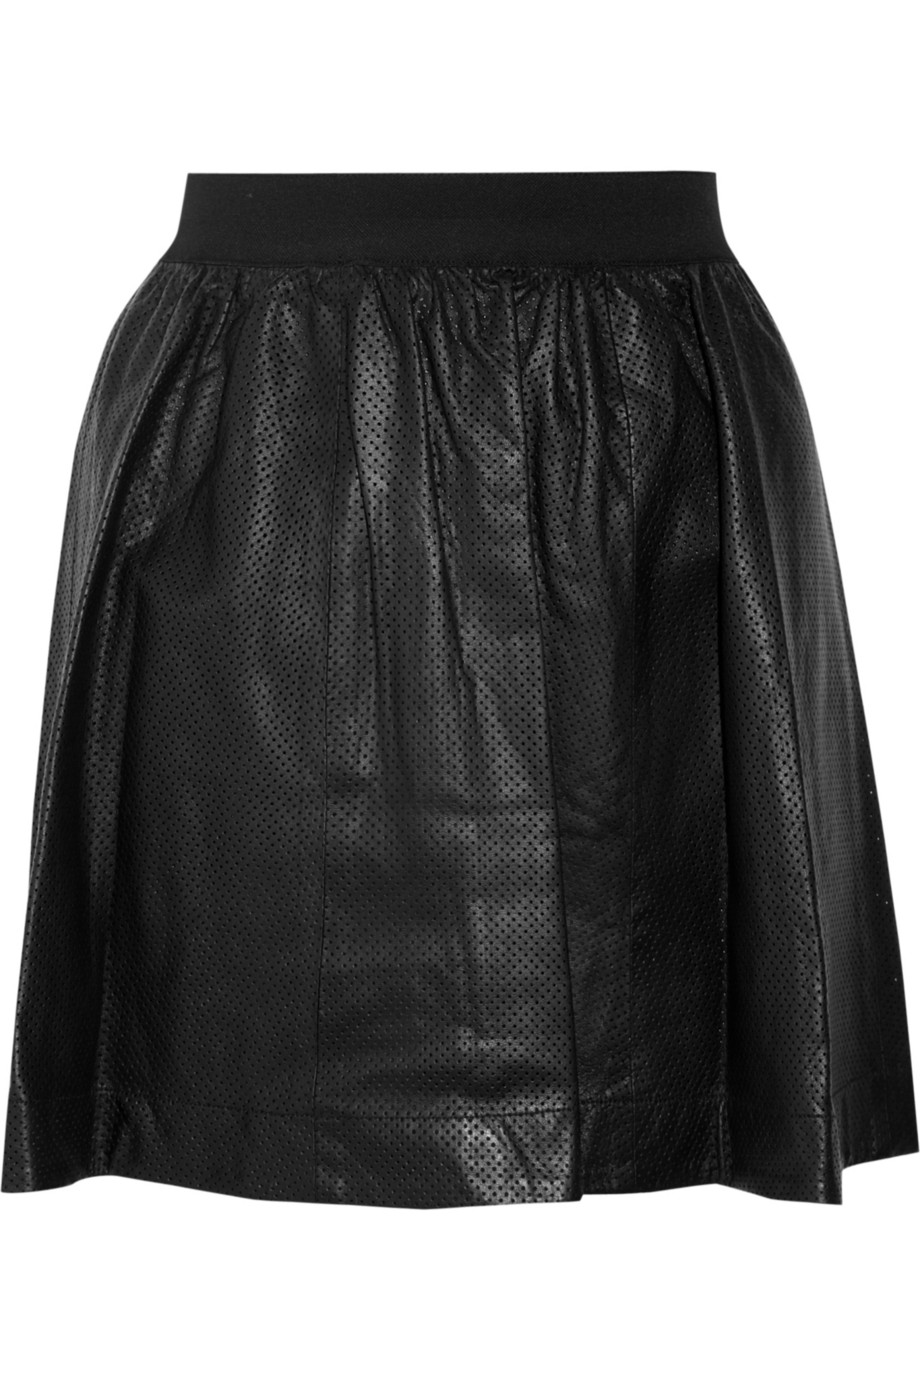 Rebecca taylor Perforated Leather Mini Skirt in Black | Lyst